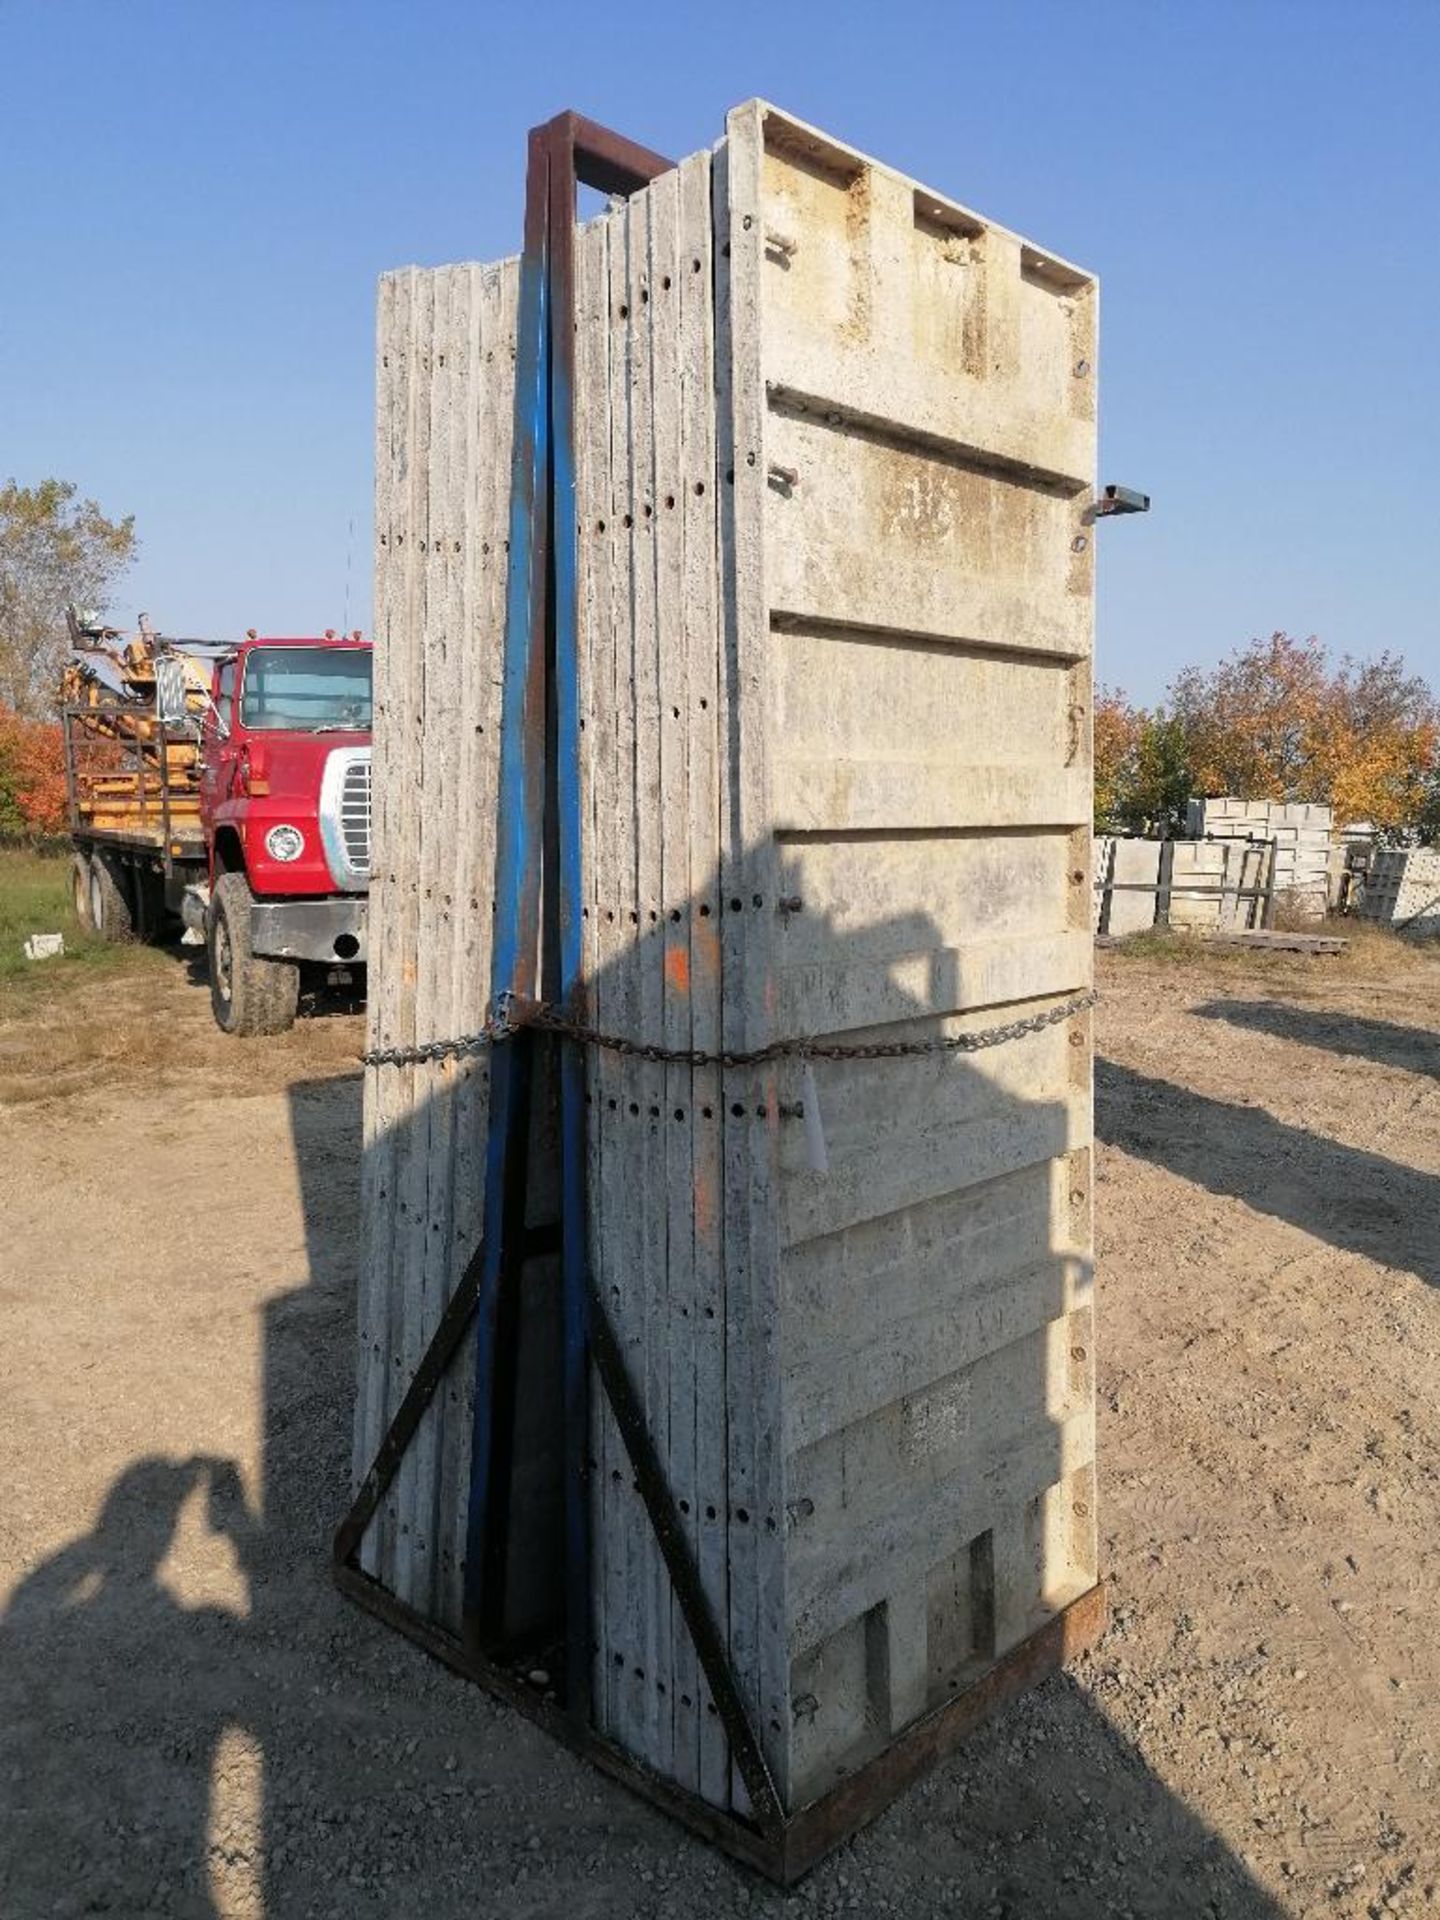 (16) 36" X 8' Precise Smooth Aluminum Concrete Forms 6-12 Hole Pattern with attached hardware,